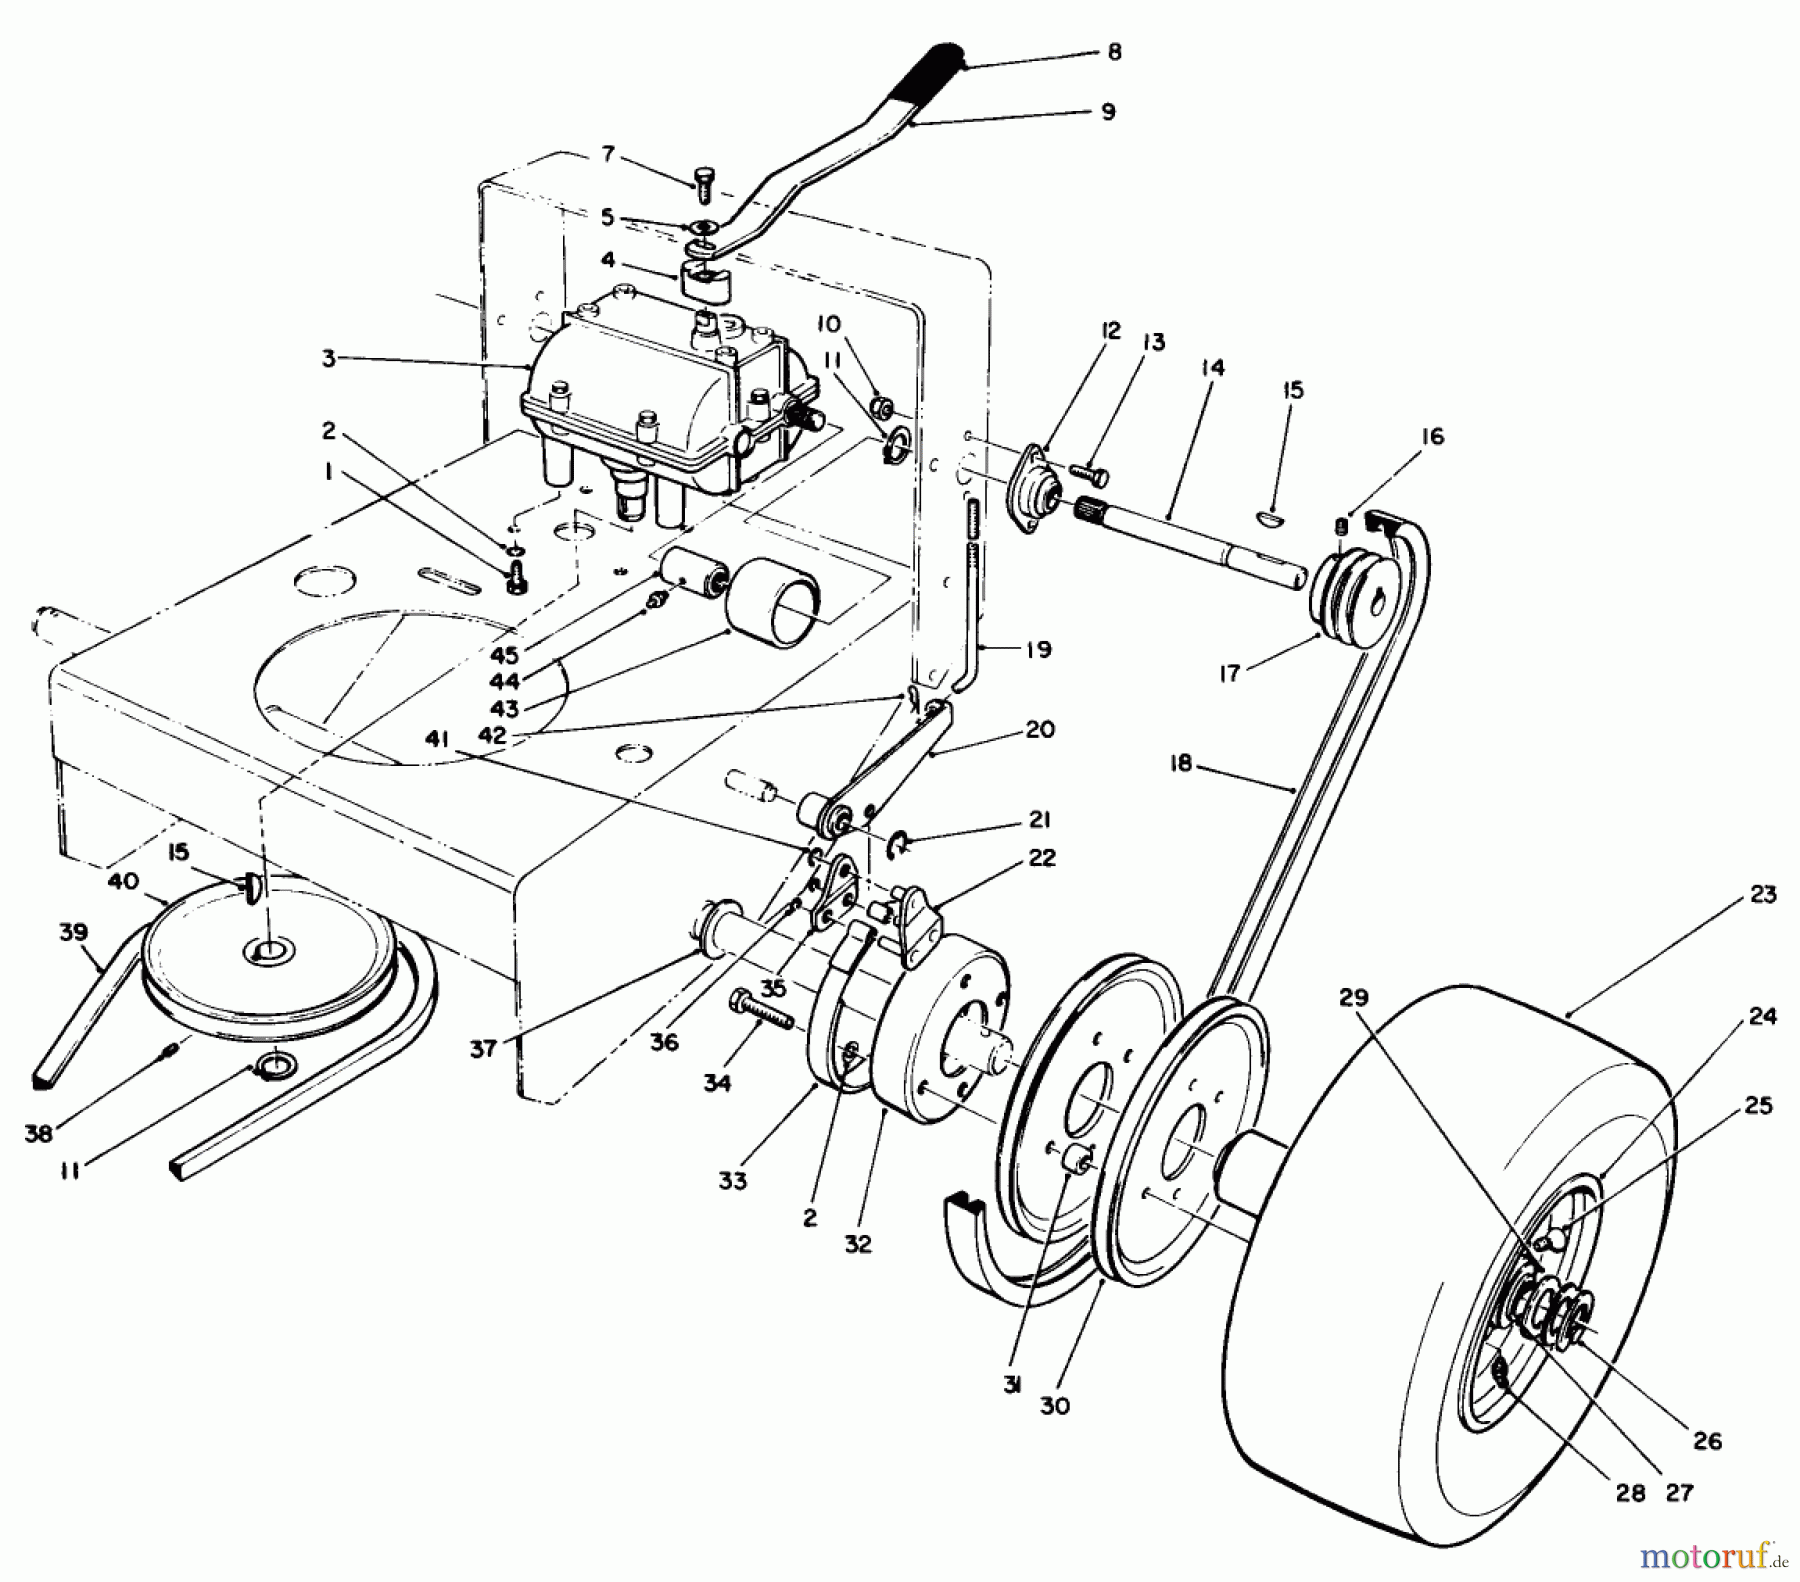  Toro Neu Mowers, Drive Unit Only 30102 - Toro Mid-Size Proline Gear Traction Unit, 12 hp, 1990 (0000001-0999999) AXLE ASSEMBLY